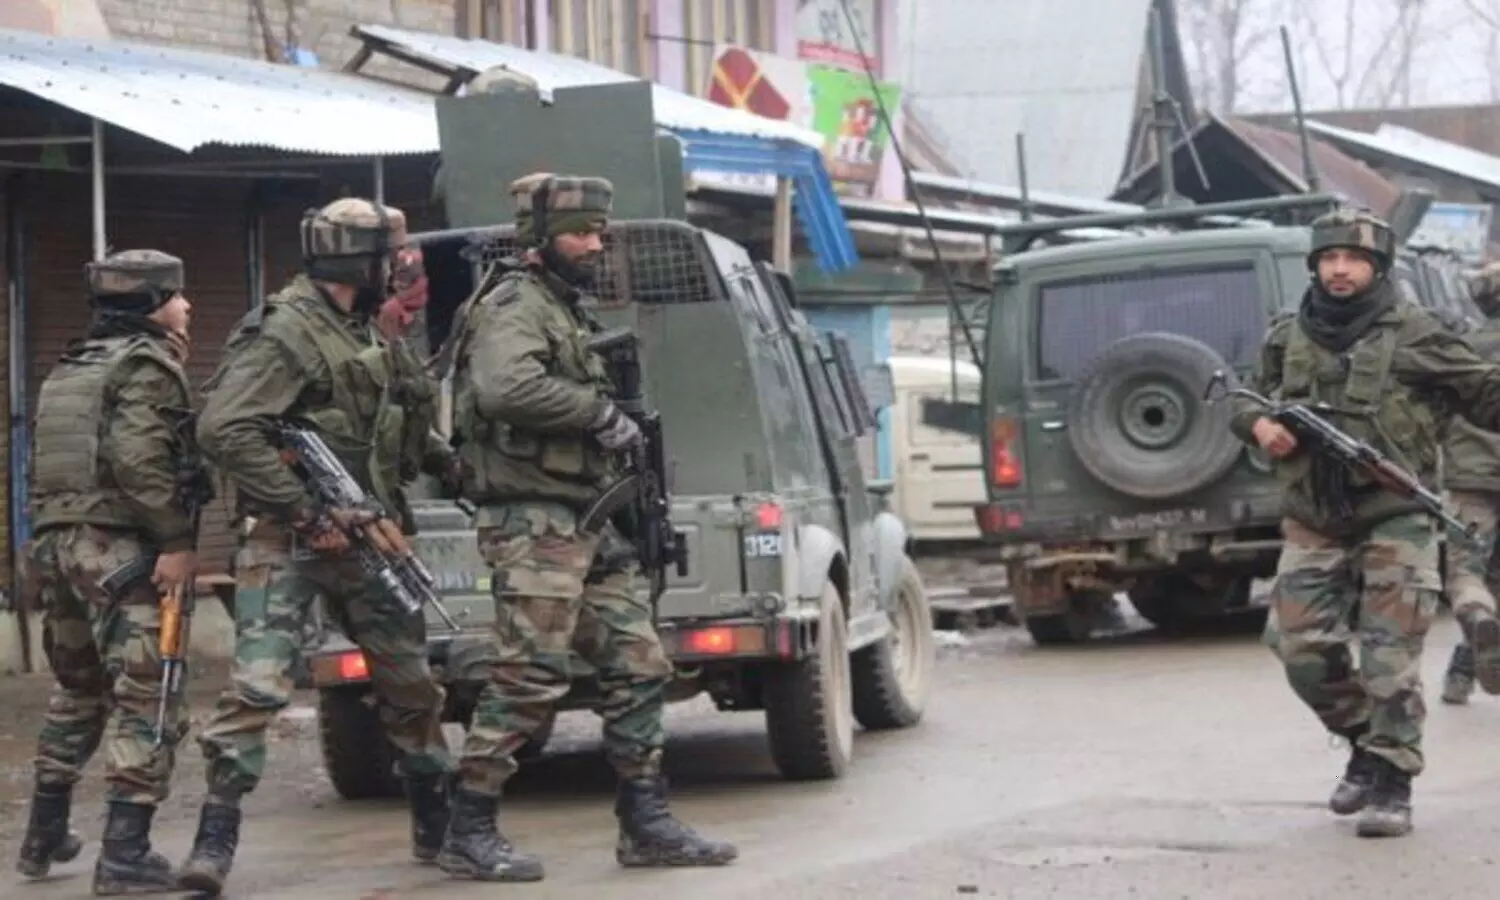 Terrorists attack CRPF party with grenade in Palhalan Chowk of Baramulla, 4 civilians including 2 jawans injured